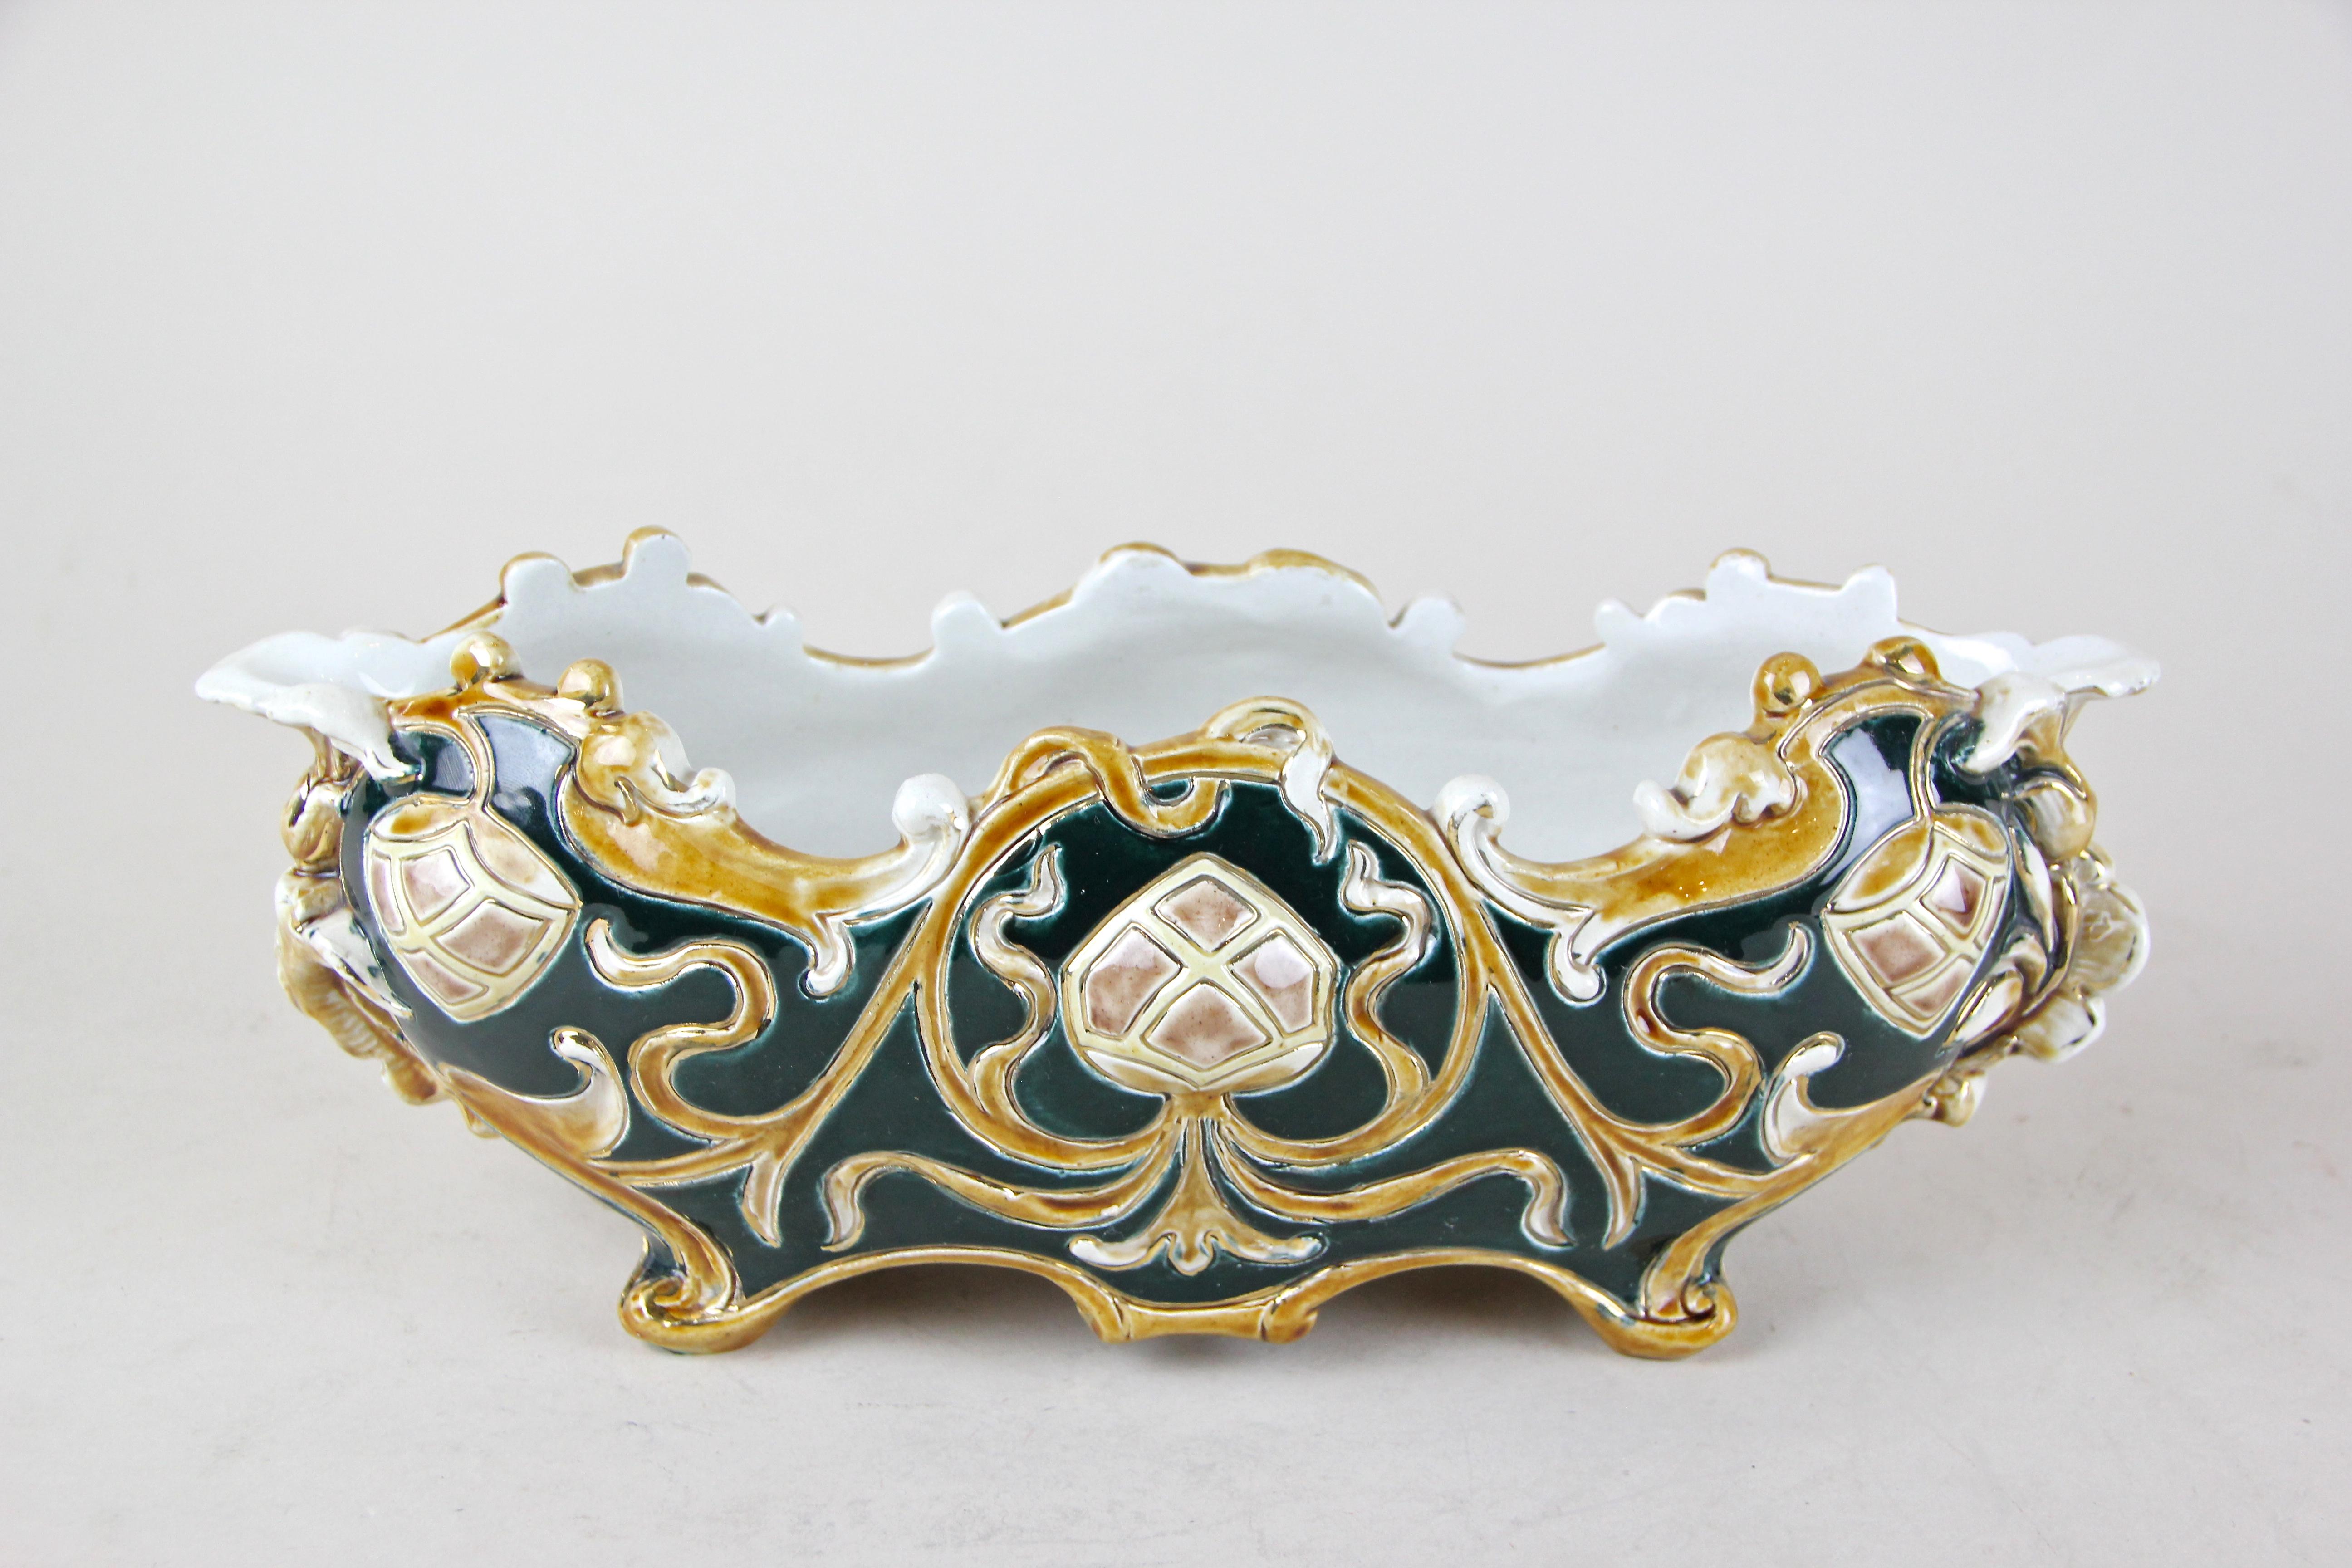 Beautiful shaped Majolica Jardinière produced by the famous ceramic/ majolica manufacturer Wilhelm Schiller & Son around 1890. This majolica piece shows an amazing floral, hand-painted design and wonderful coloration in dark blue/green and brown